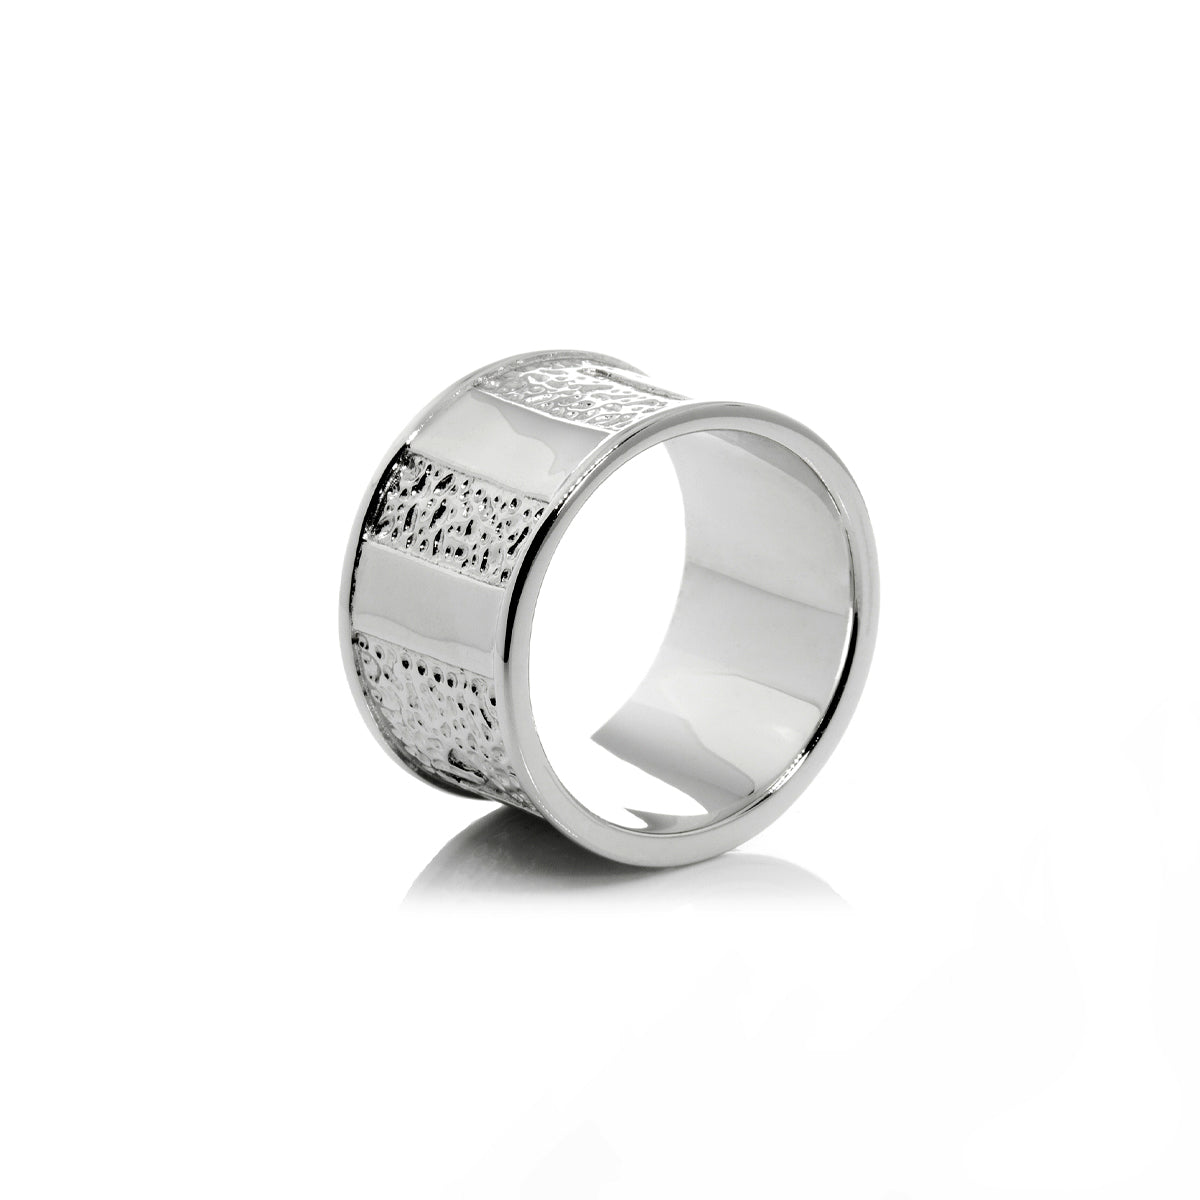 ICELAND RUNE RING SILVER